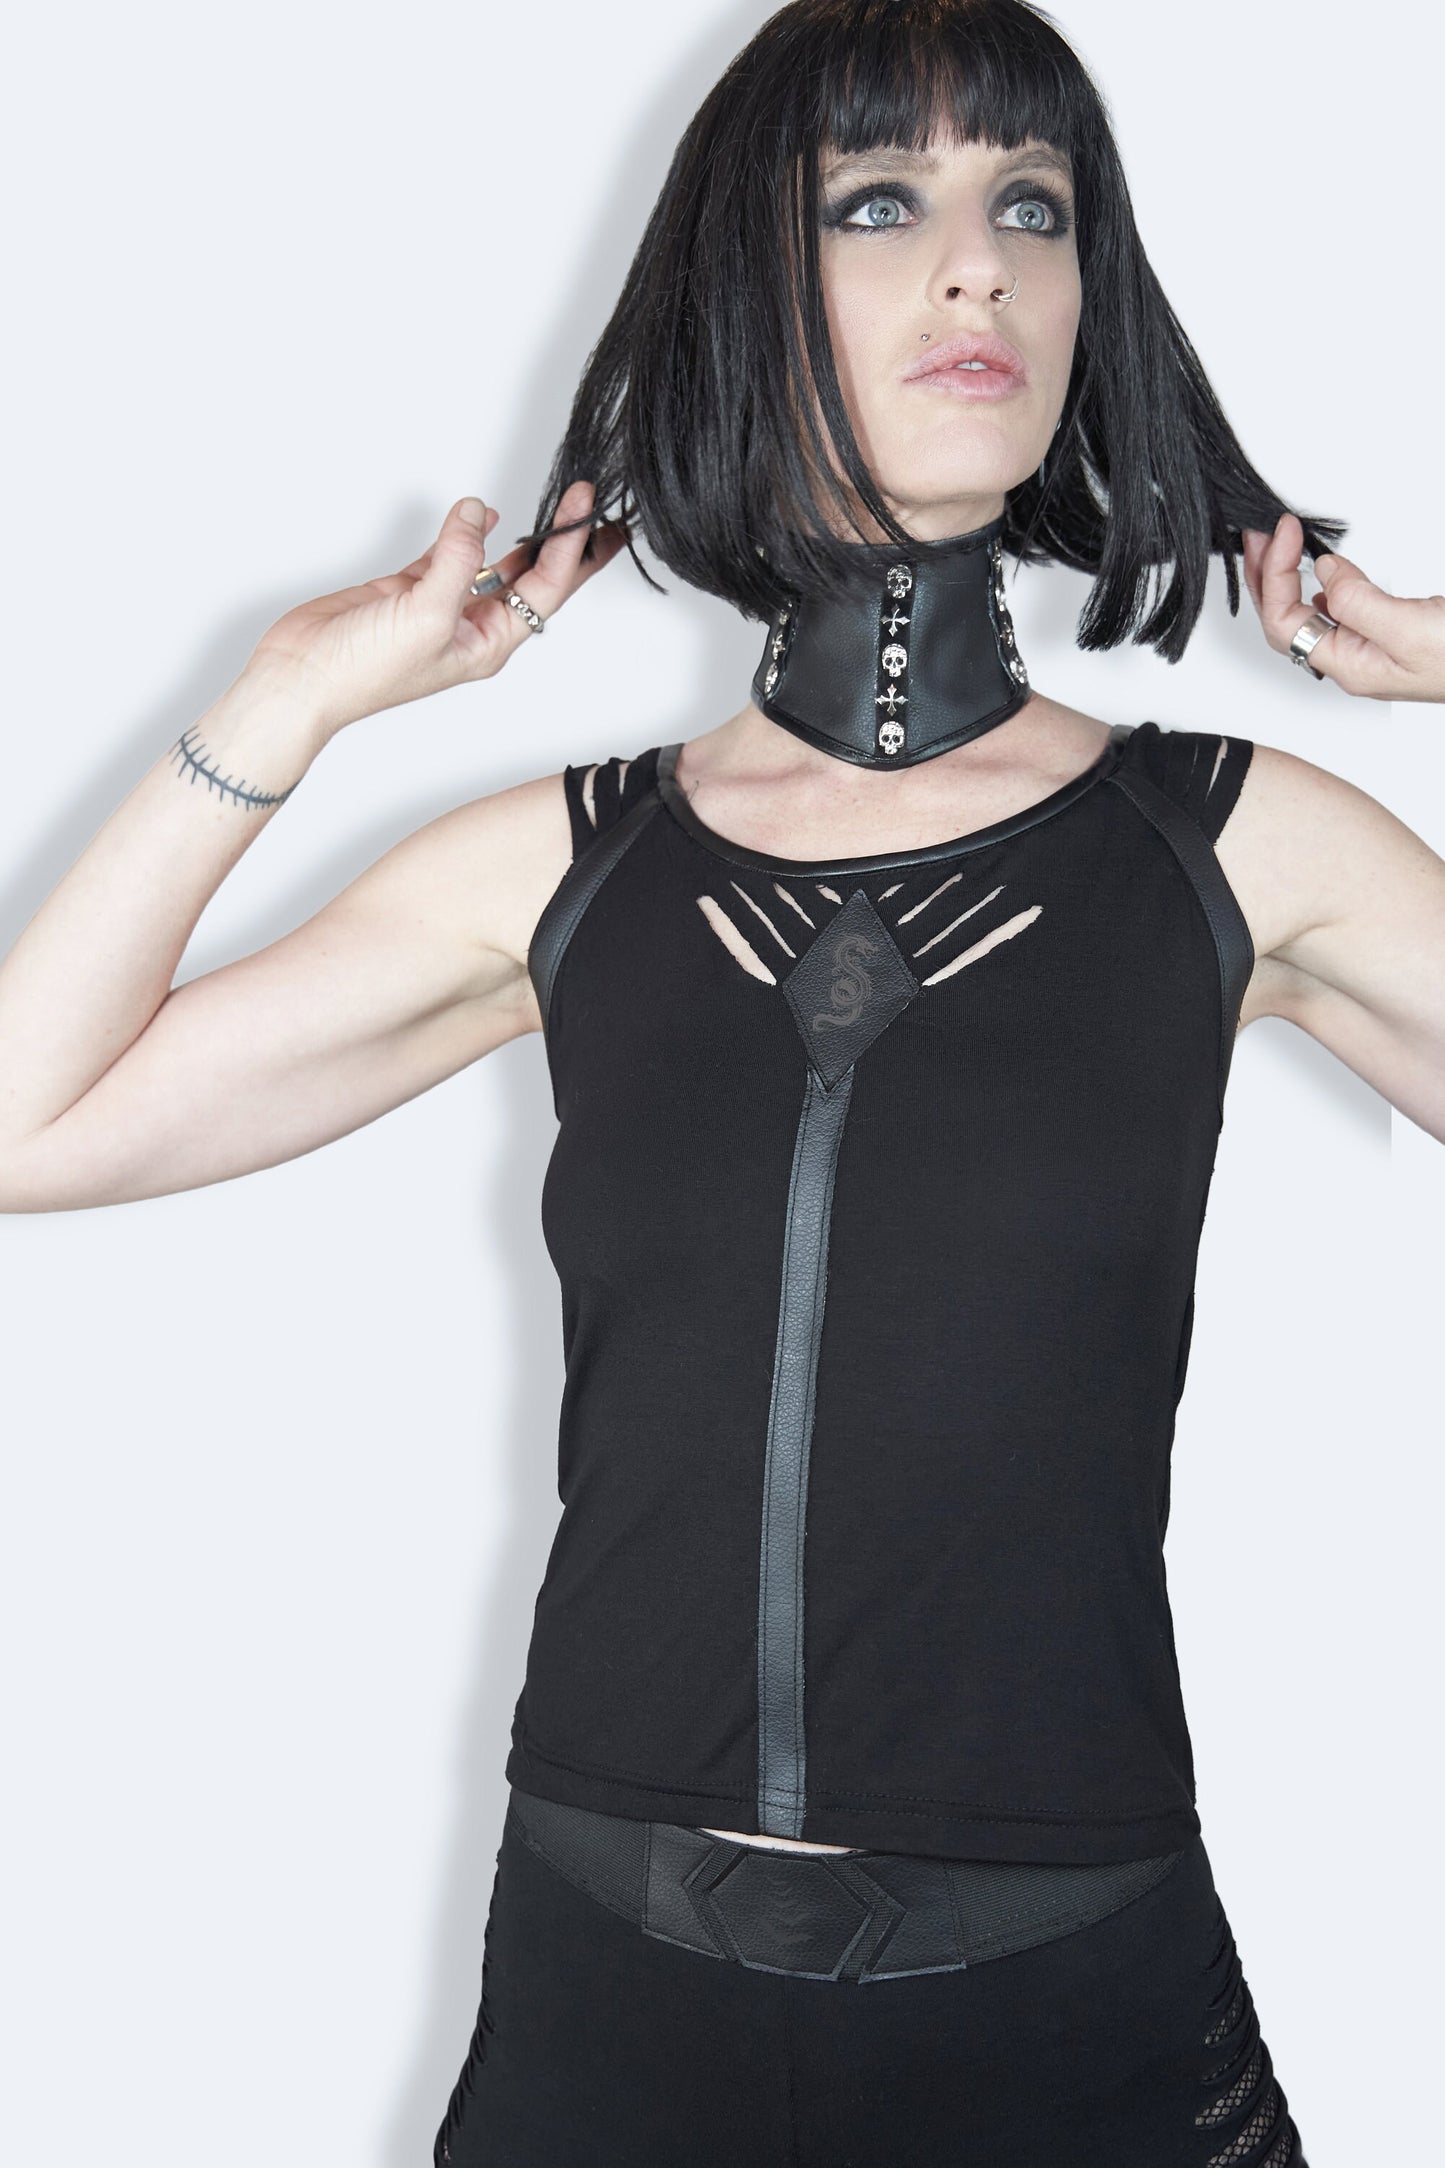 Black cut out top goth tank top faux leather top | cutout tank top goth shirt witch top witch shirt | occult top cut out tank top